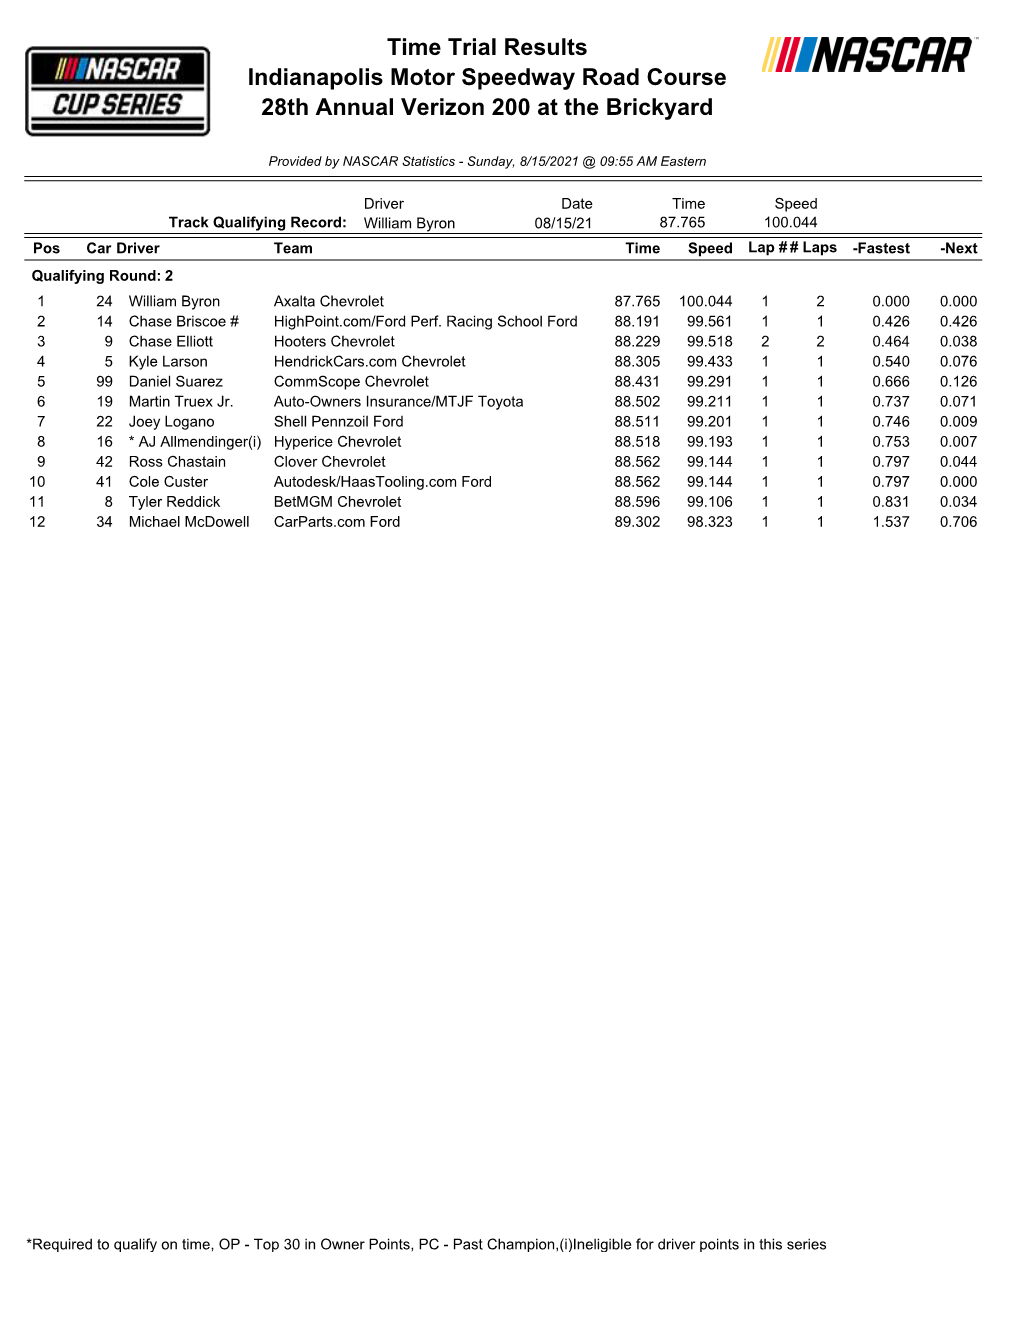 Time Trial Results Indianapolis Motor Speedway Road Course 28Th Annual Verizon 200 at the Brickyard